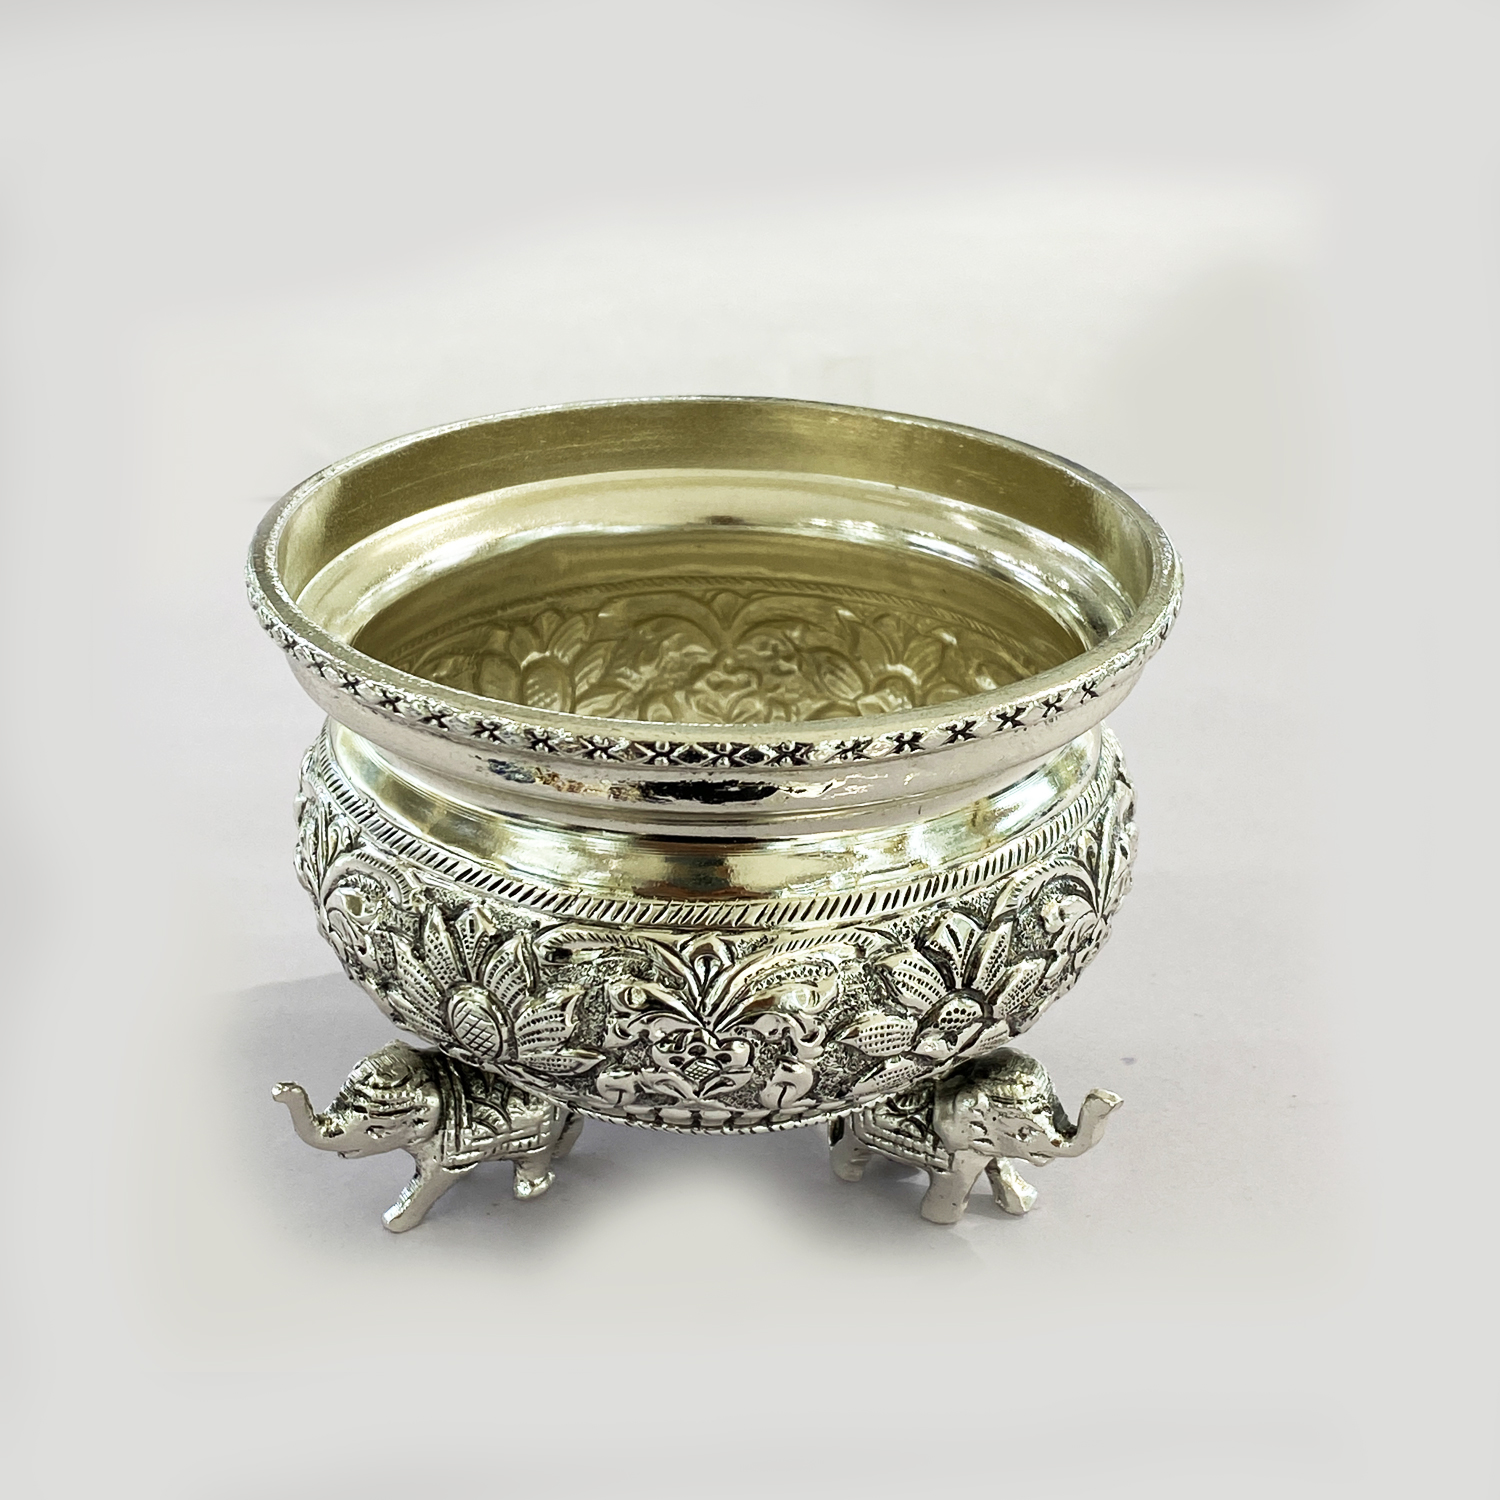 Antique Silver Plated Bowl or Urli | 4.2 Inch